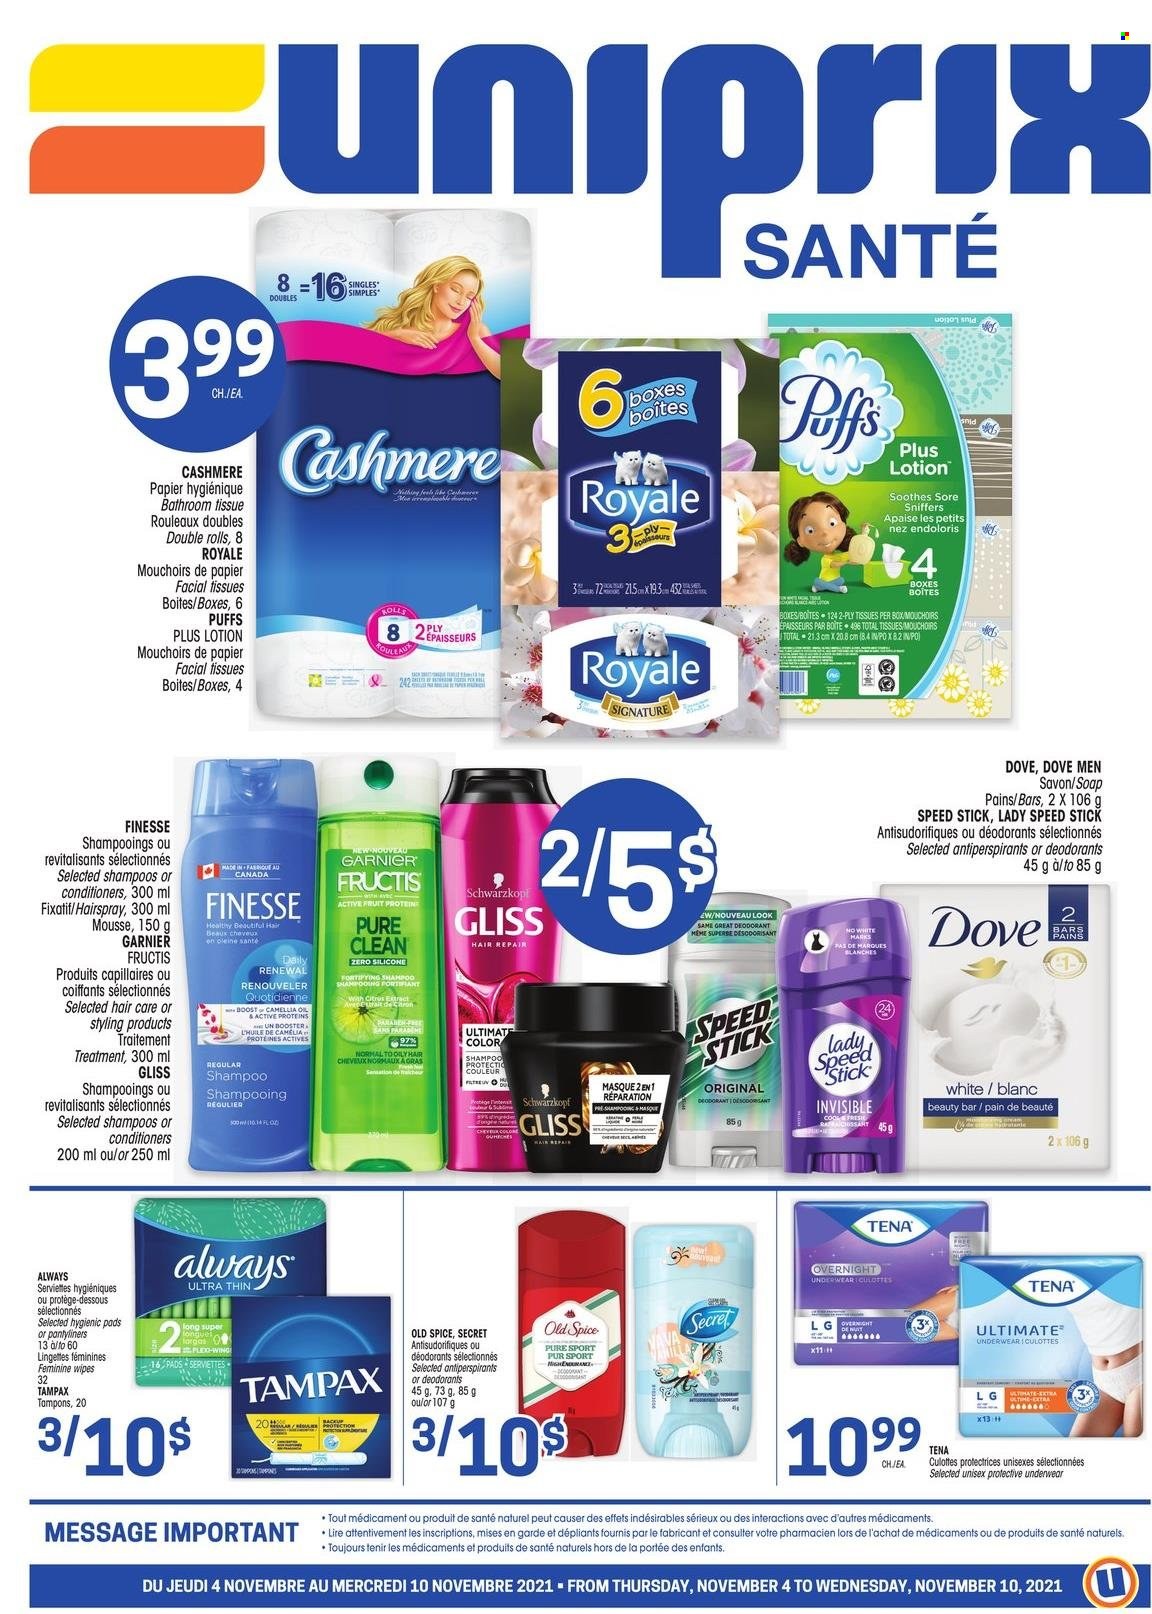 thumbnail - Uniprix Santé Flyer - November 04, 2021 - November 10, 2021 - Sales products - puffs, spice, wipes, bath tissue, Gliss, soap, facial tissues, Fructis, anti-perspirant, Speed Stick, Dove, Garnier, shampoo, Tampax, Old Spice, Schwarzkopf, deodorant. Page 1.